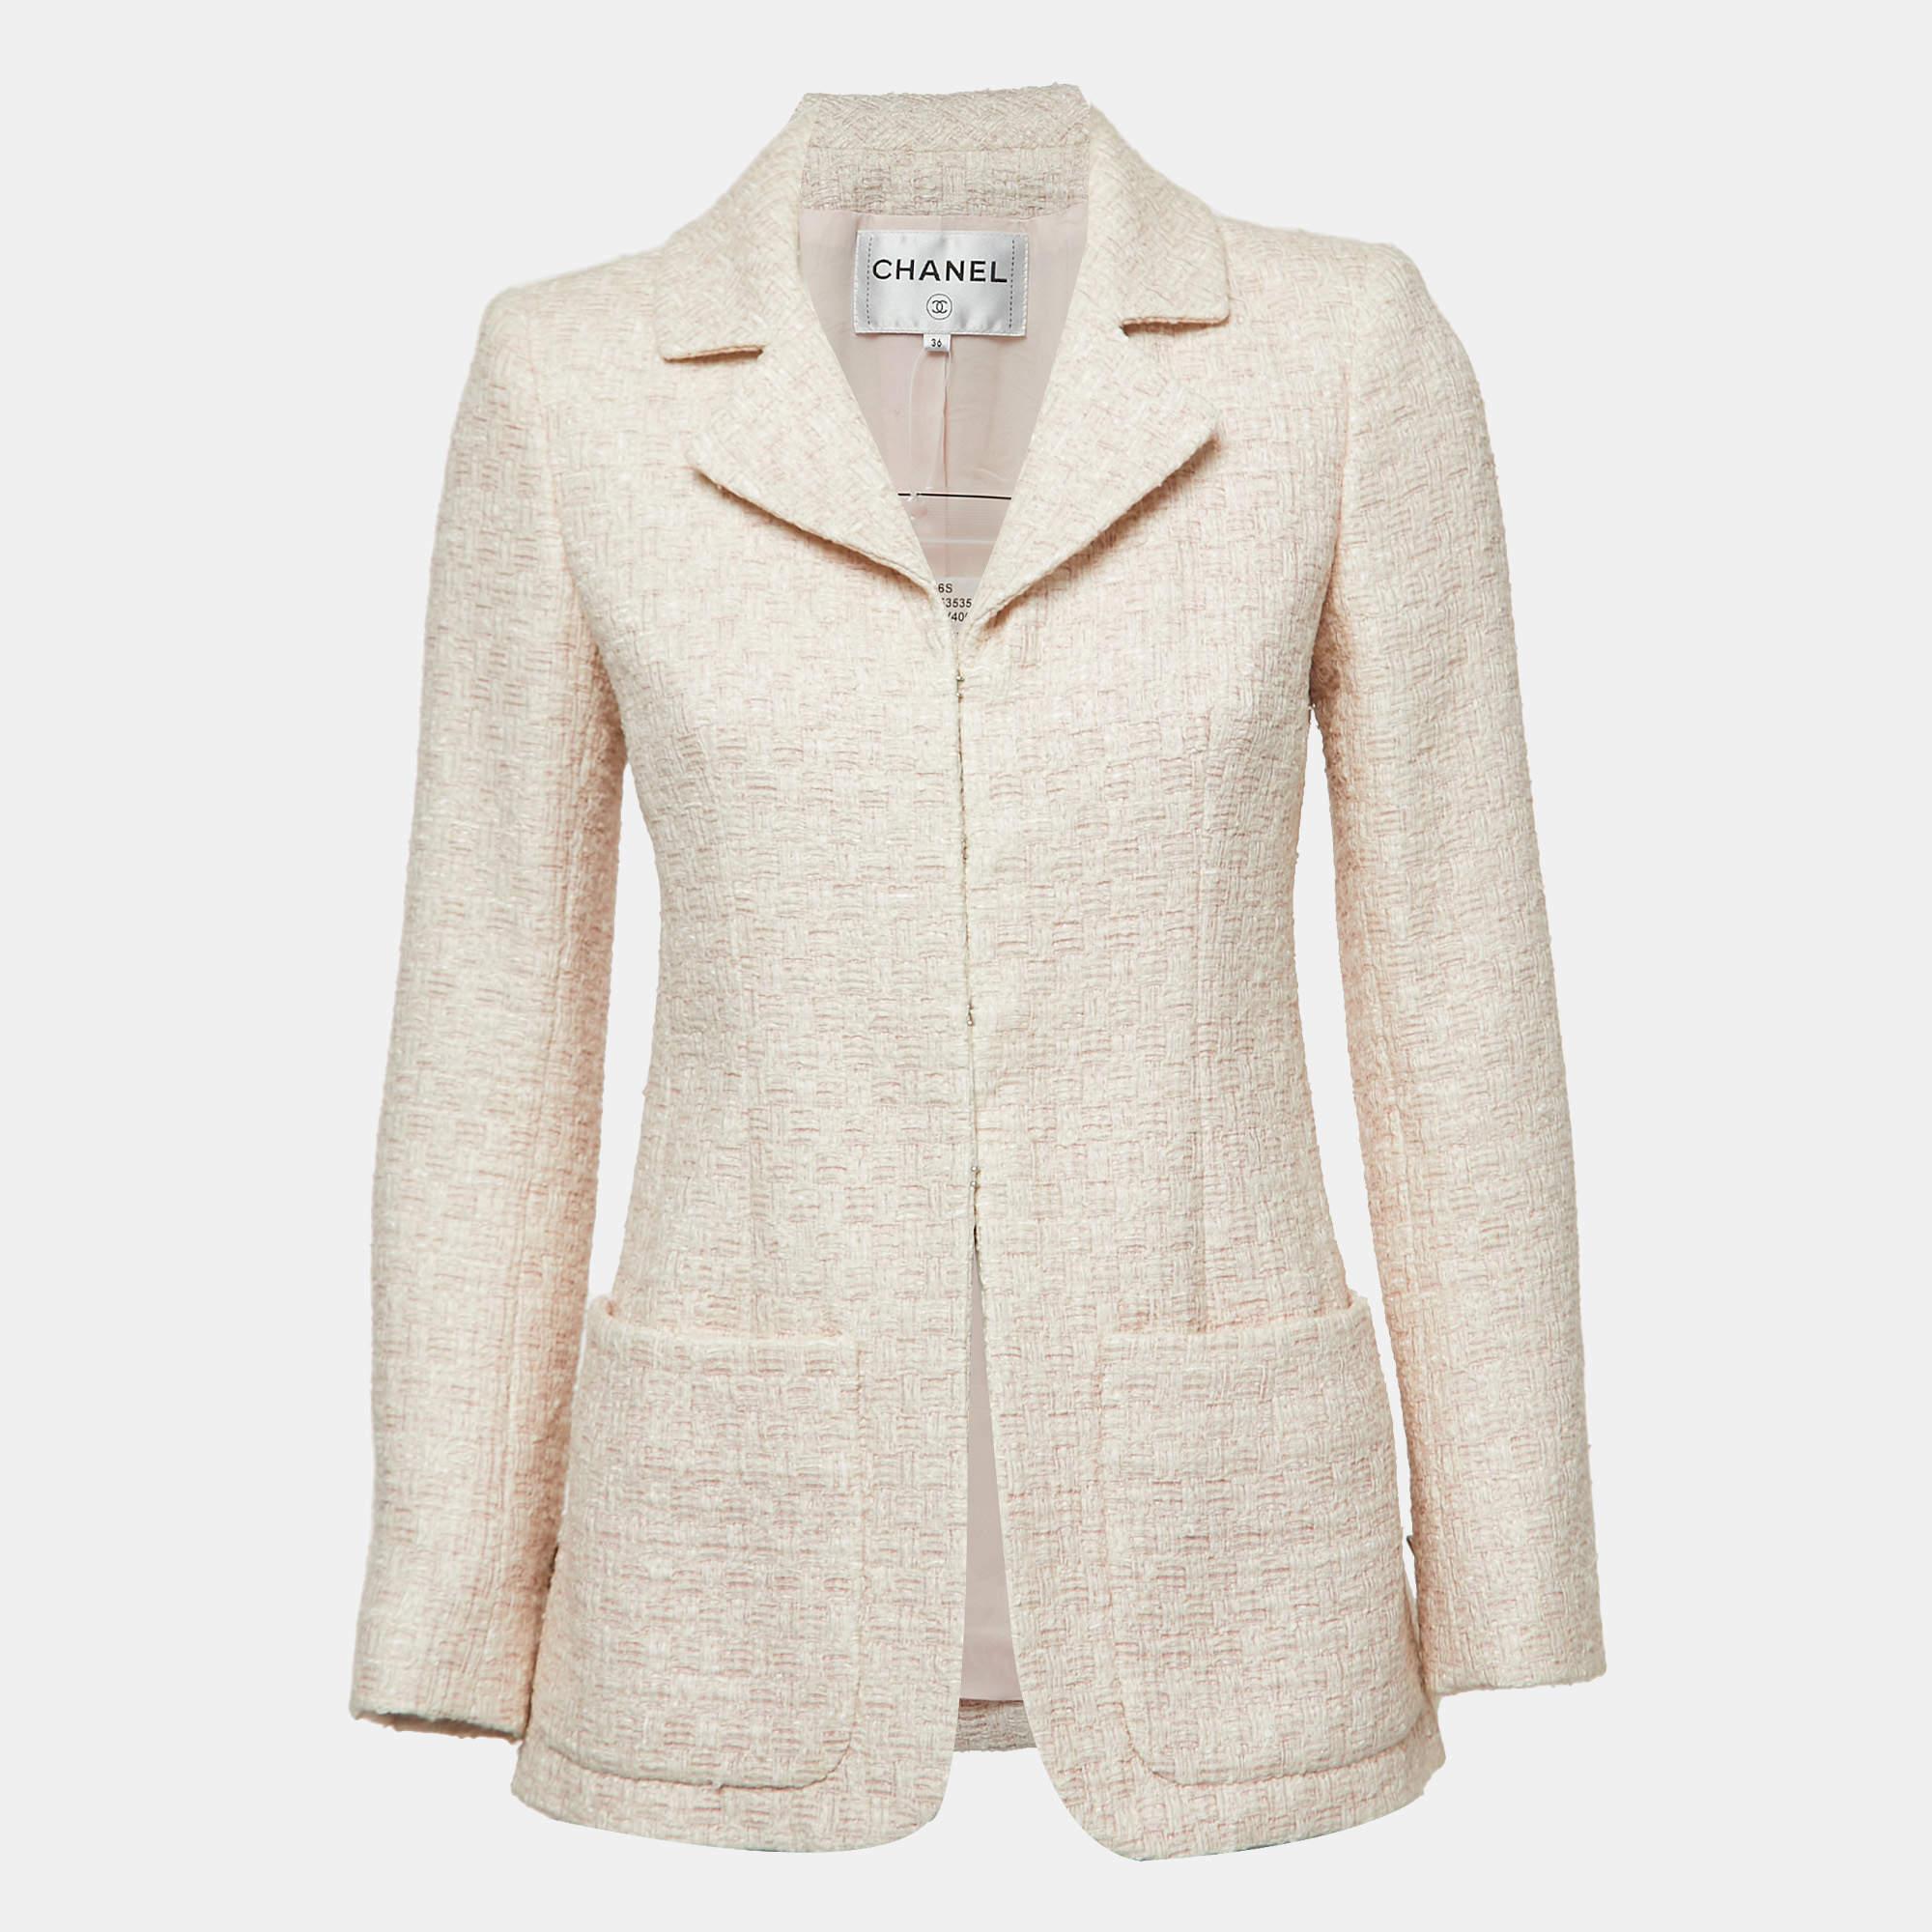 With a blend of feminine class and vintage style, Chanel brings to you a stunning Tweed jacket! Made in a pretty pink color, it combines with hook closure and also a sleek collar. The blazer style and lapel make it perfect to pair with a solid